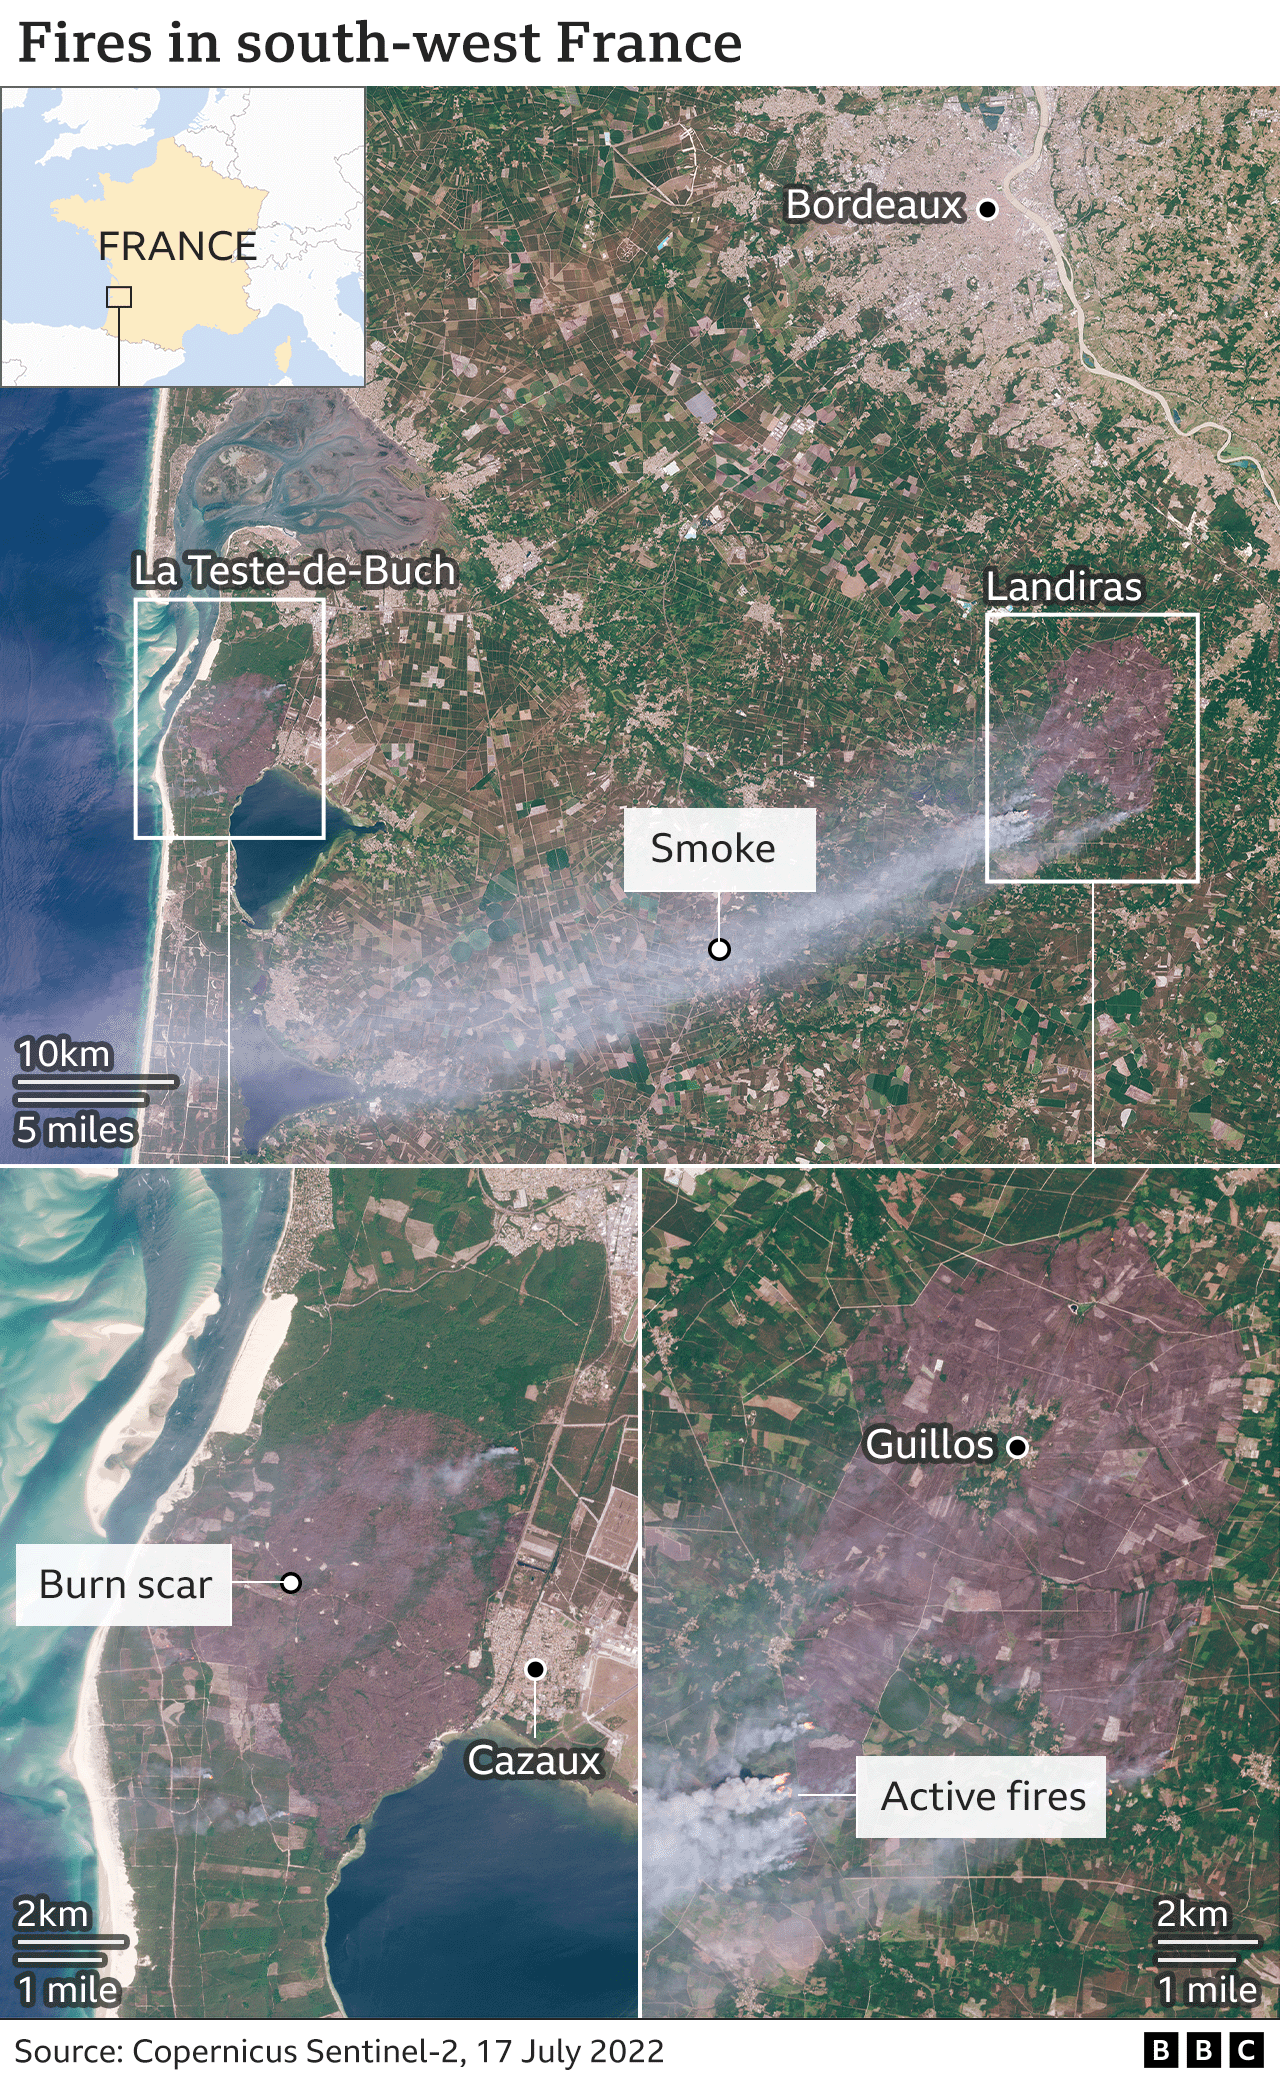 Fires in south-west France